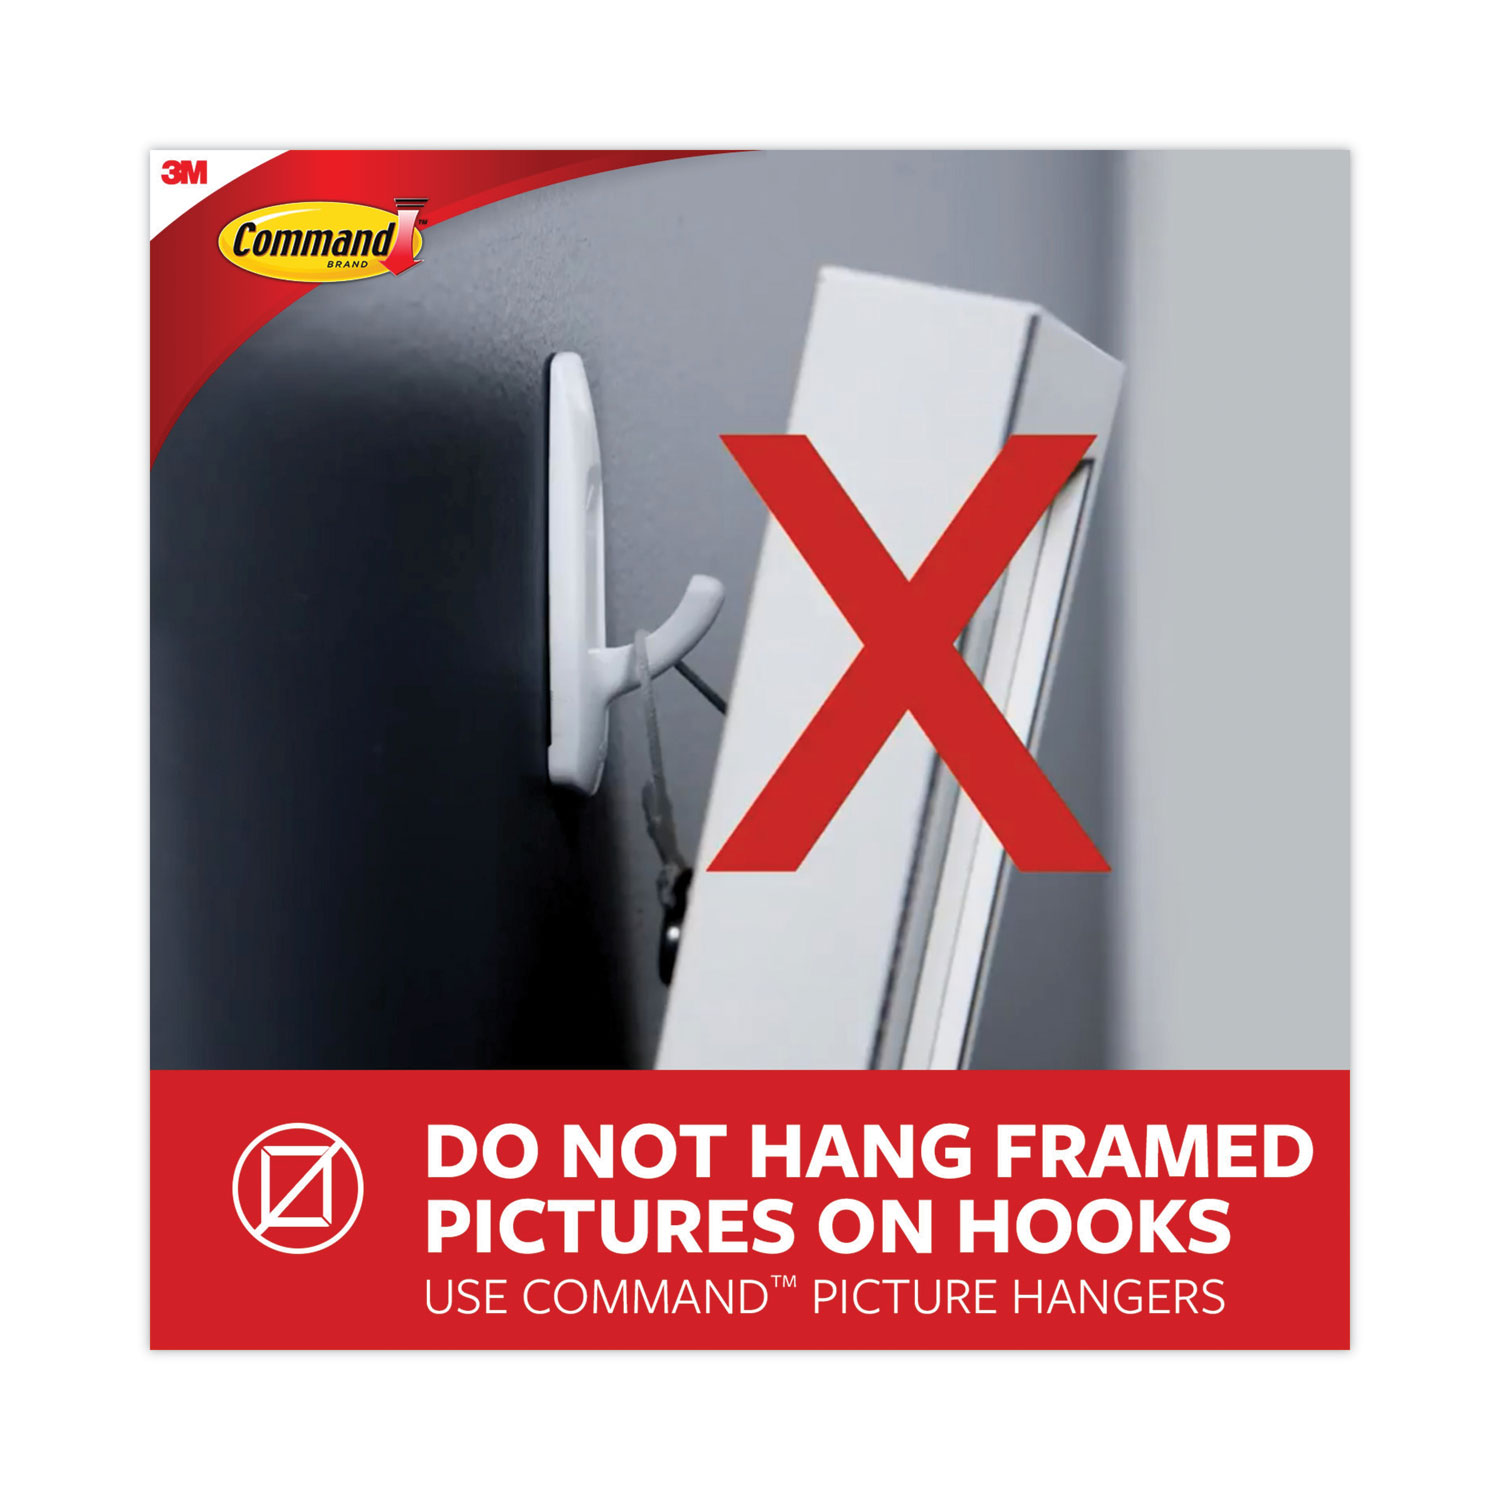 8 Packs Adhesive Hooks Heavy Duty Wall Hangers Without Nails 11 Pounds (Max), 90 Degree Rotating Seamless Hooks Sticky Hooks for Hanging Bathroom